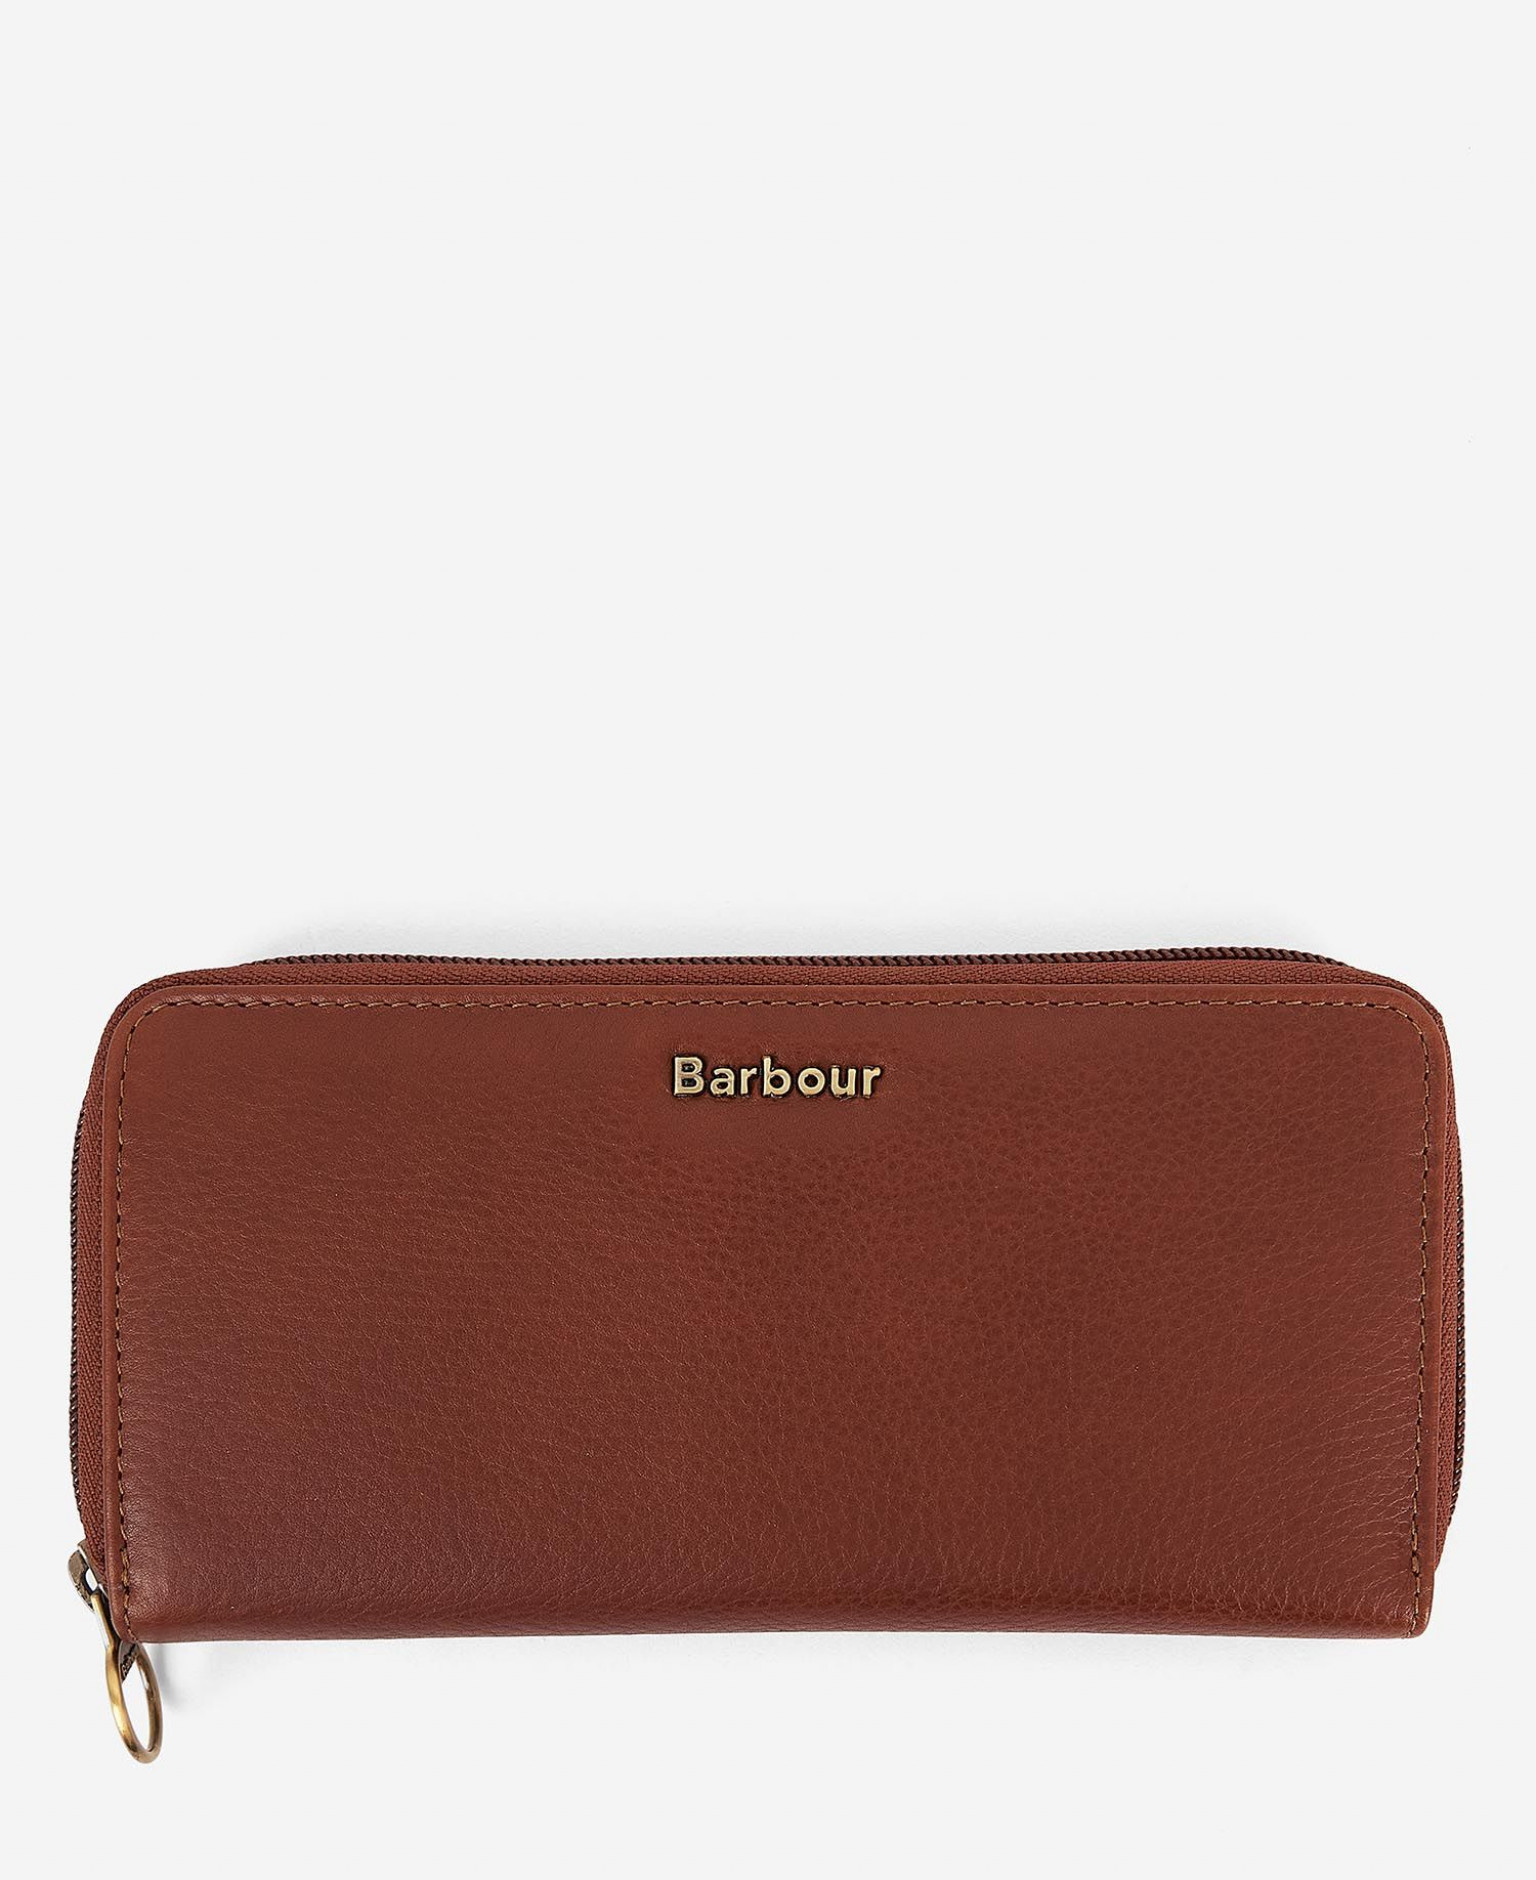 Barbour Matinee Purse Brown